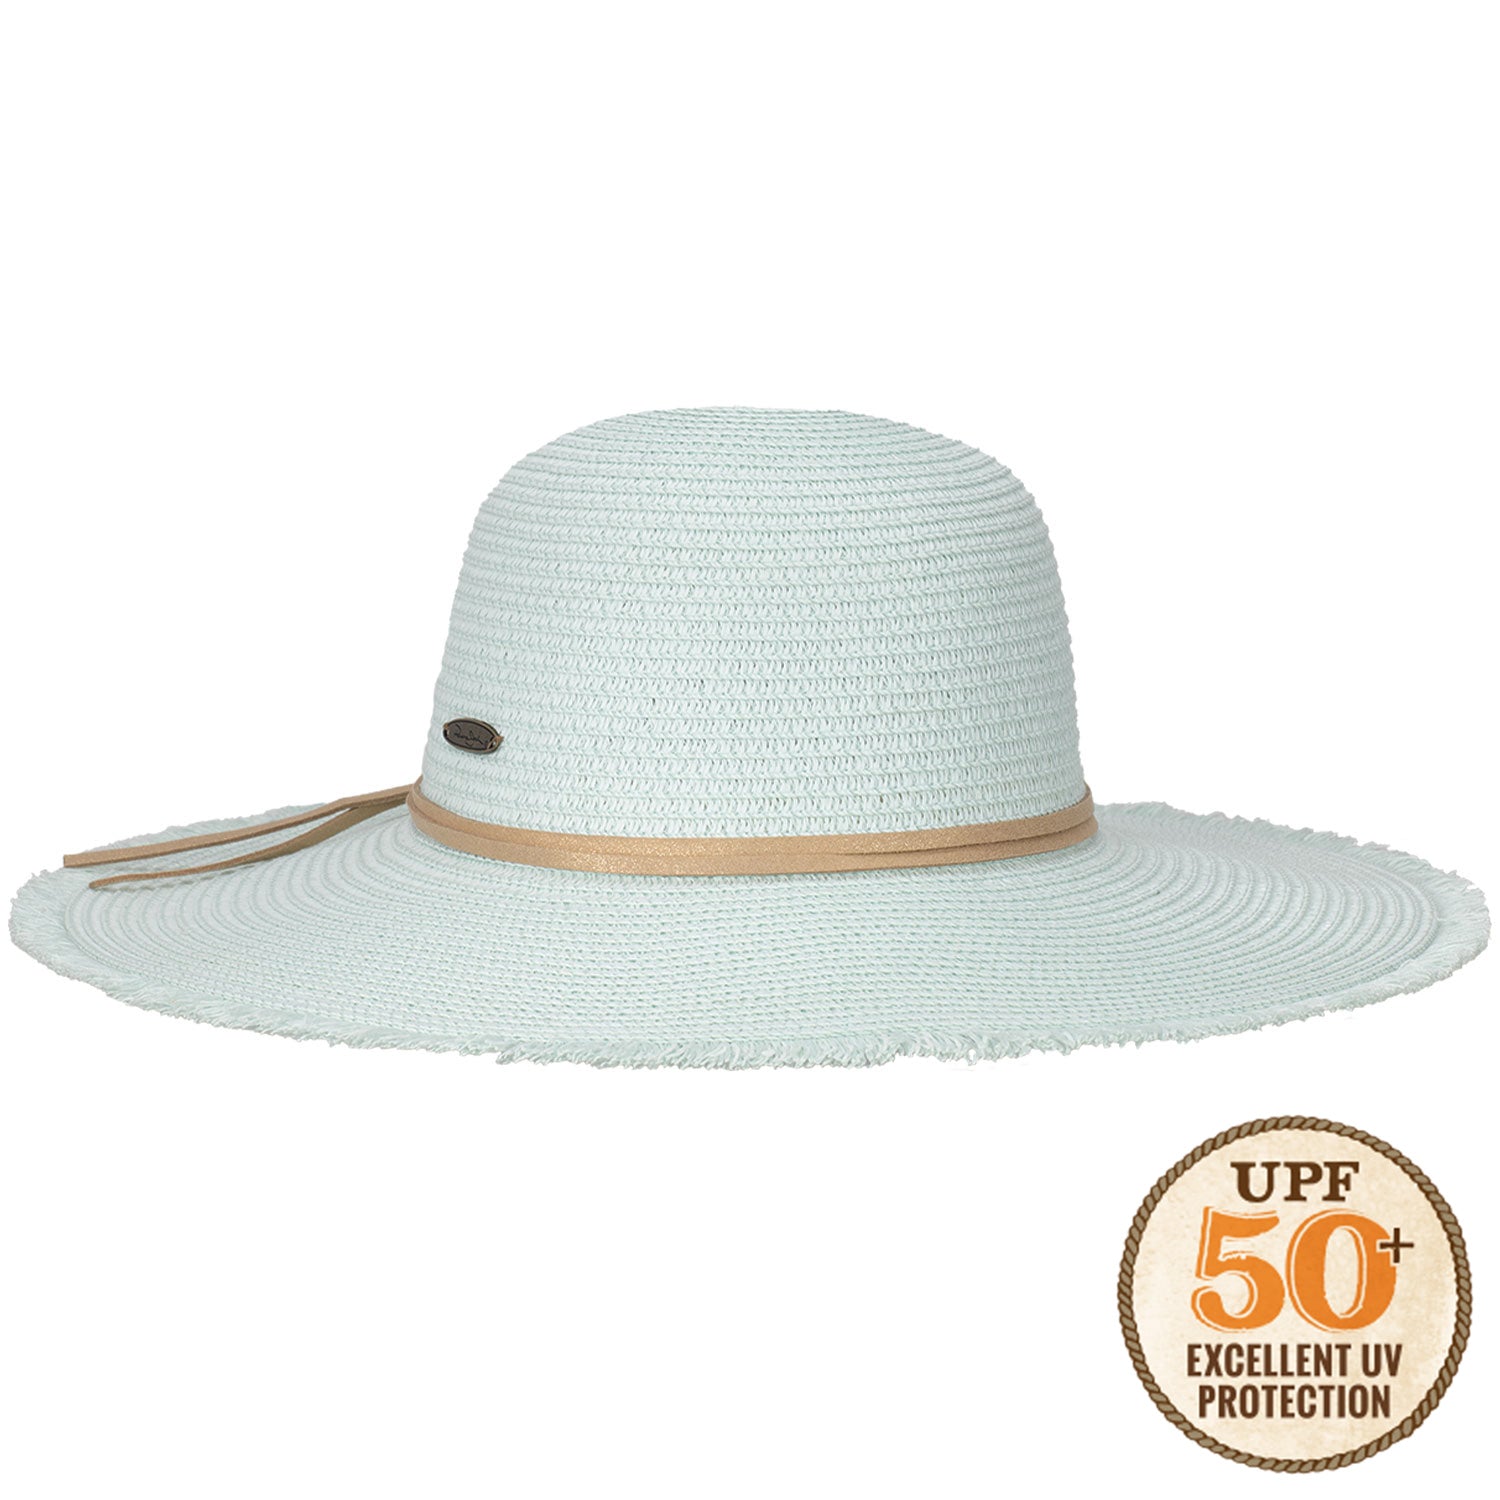 The History of the Straw Hat – Panama Jack®